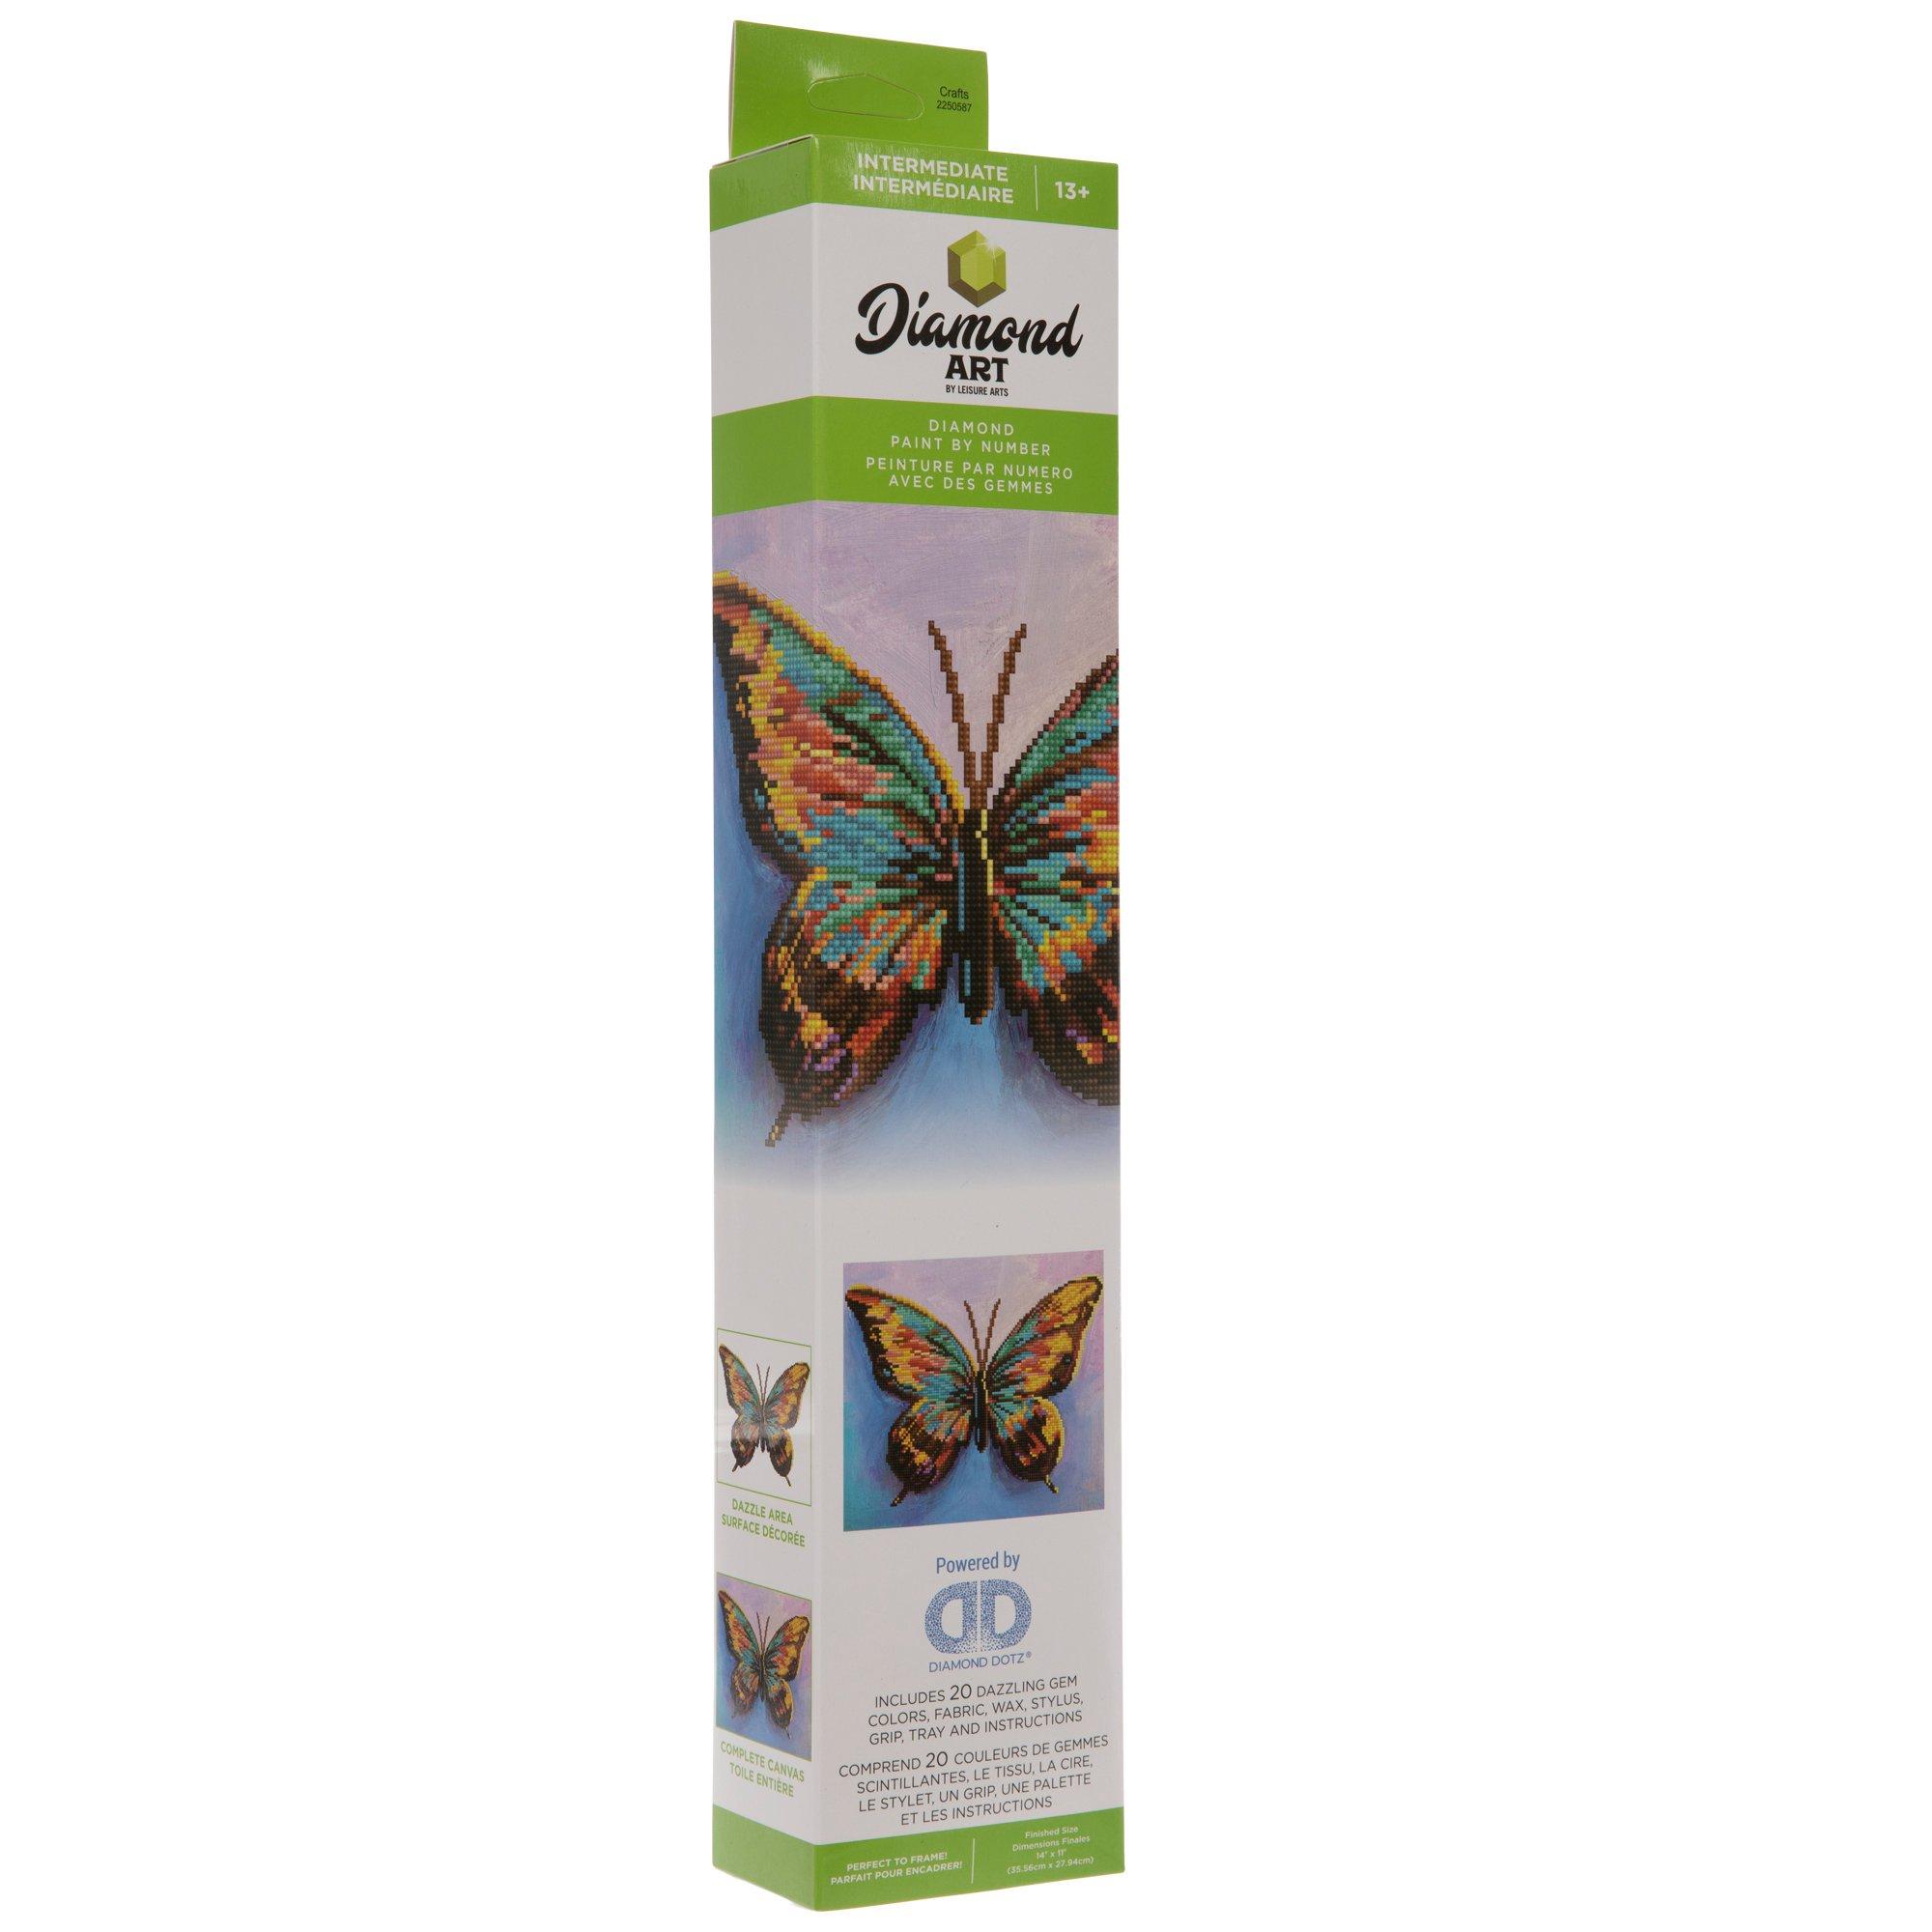 Tiffany's Butterfly Diamond Painting Kit at